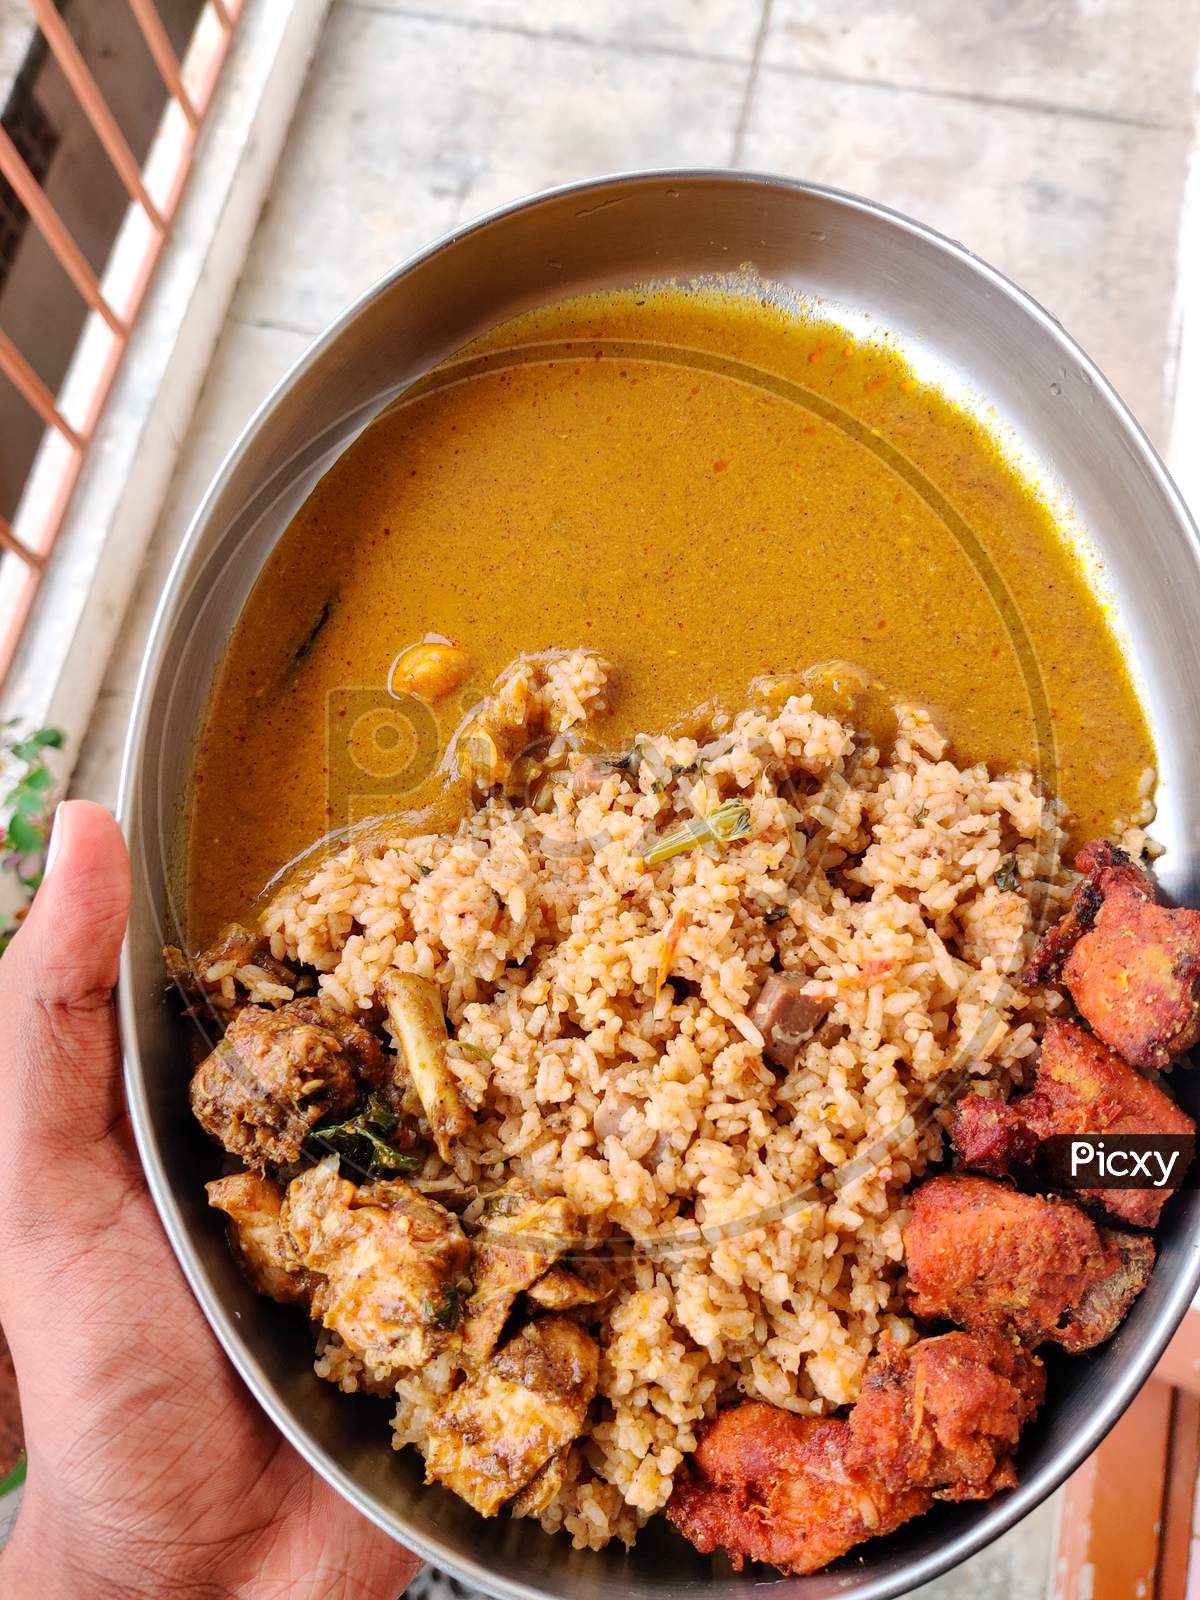 Male Hands Holding A Silver Plate Filled With Mutton Biryani, Chicken 65, Chicken Fry And Chicken Gravy. A South Indian Sunday Lunch.